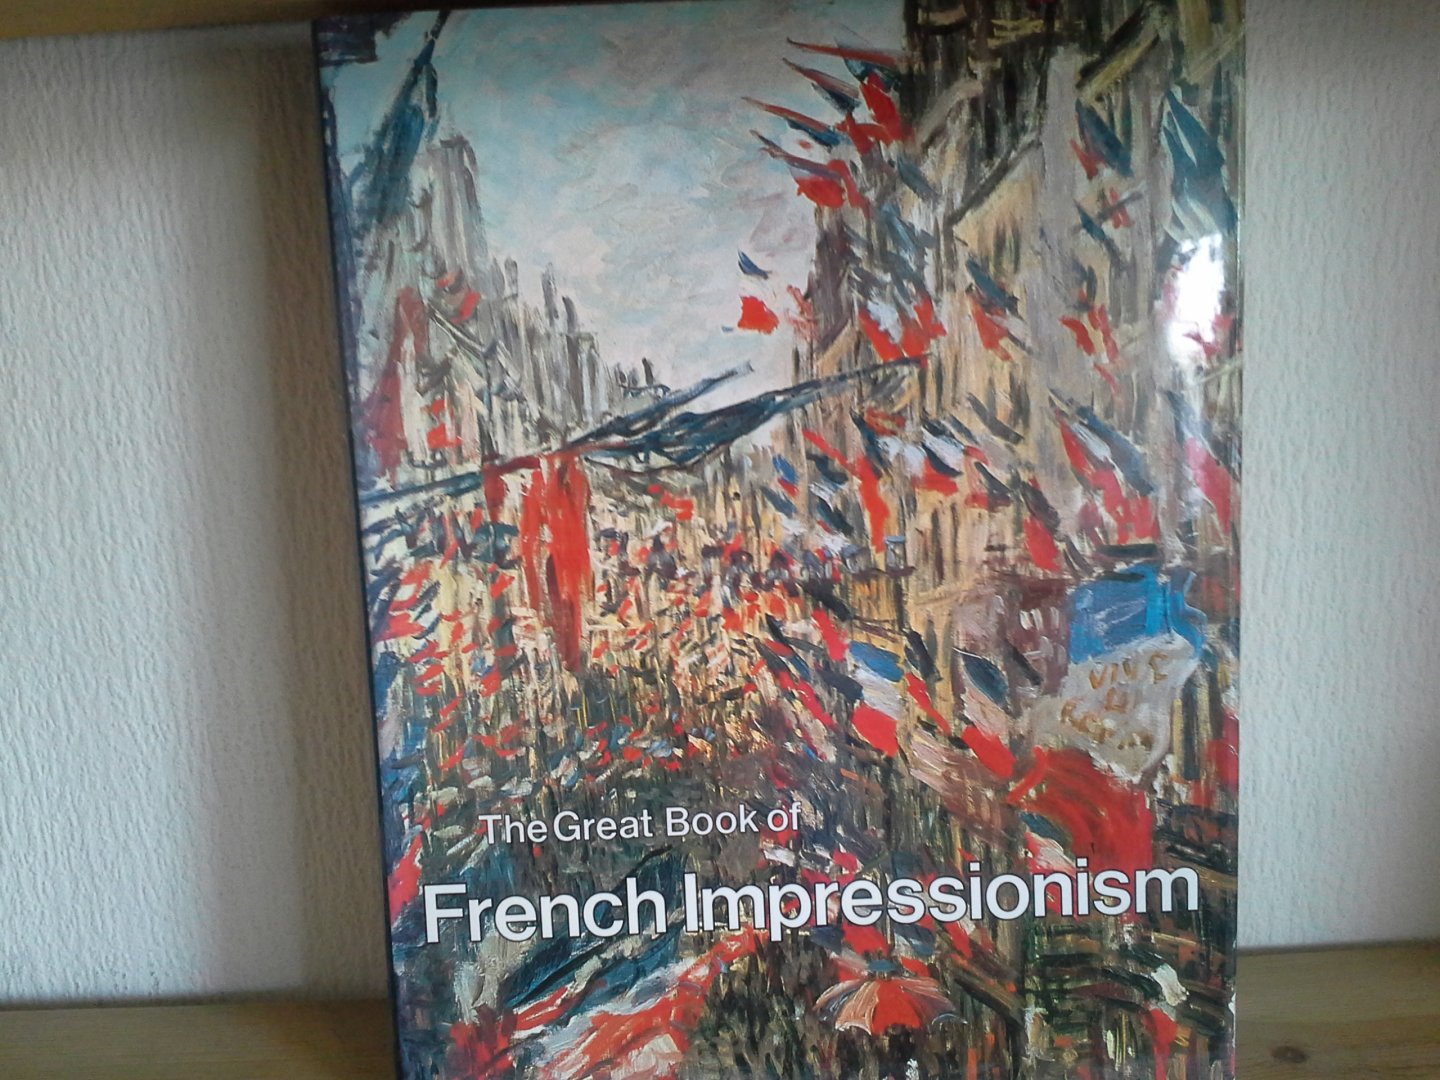 DIANE KELDER - The great book of FRENCH IMPRESSIONISM